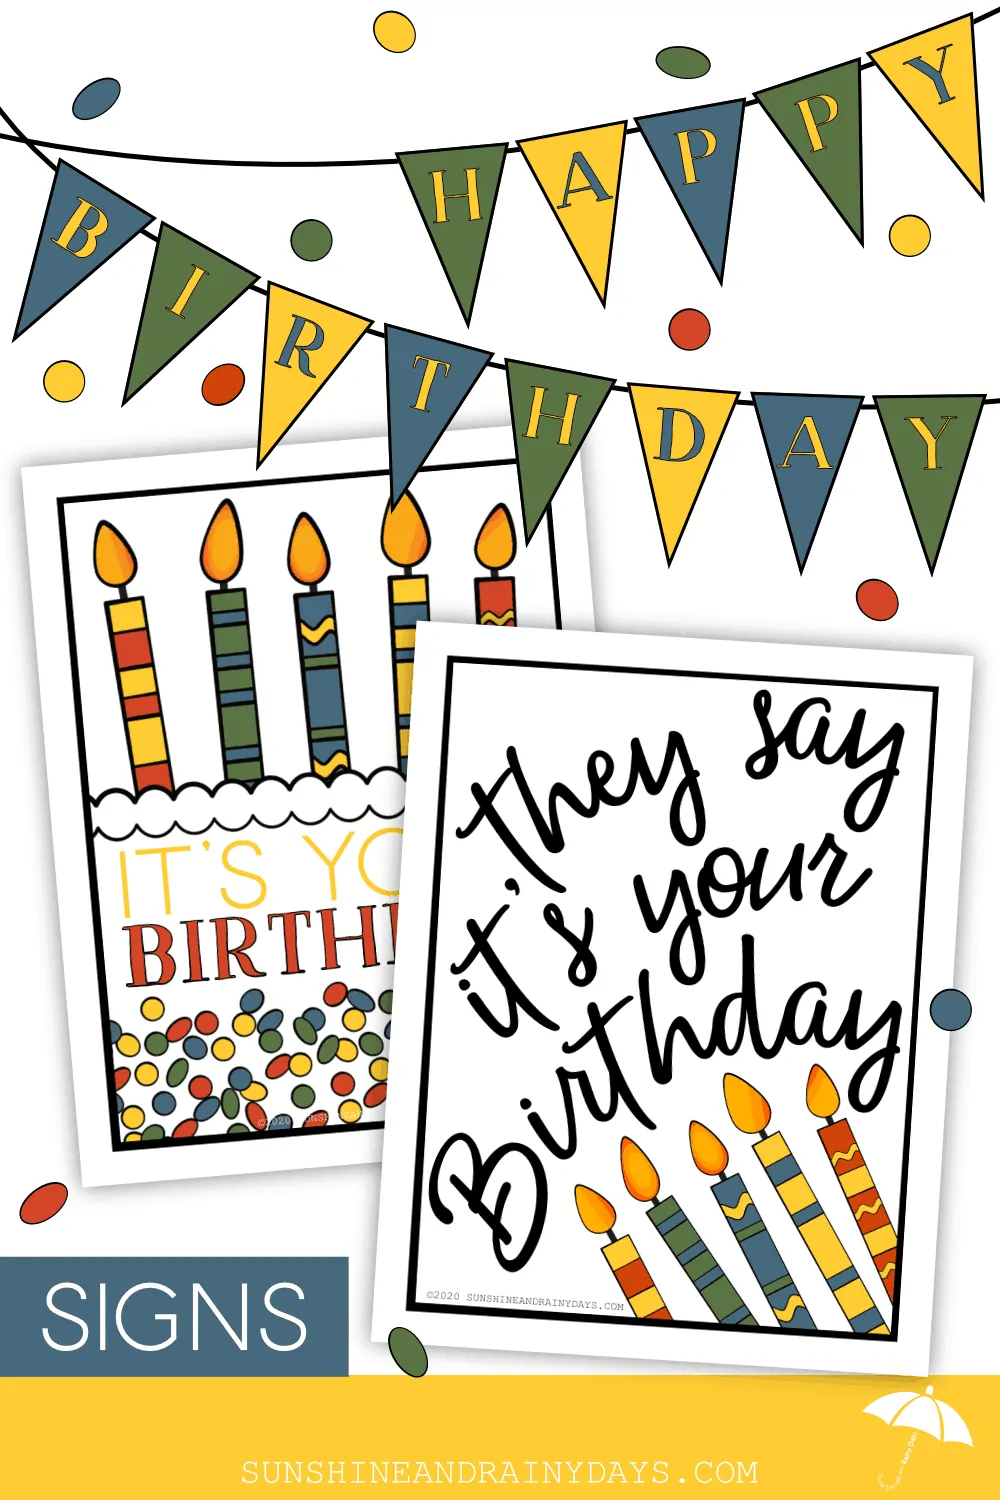 Happy Birthday Sign You Can Print At Home - Sunshine and Rainy Days